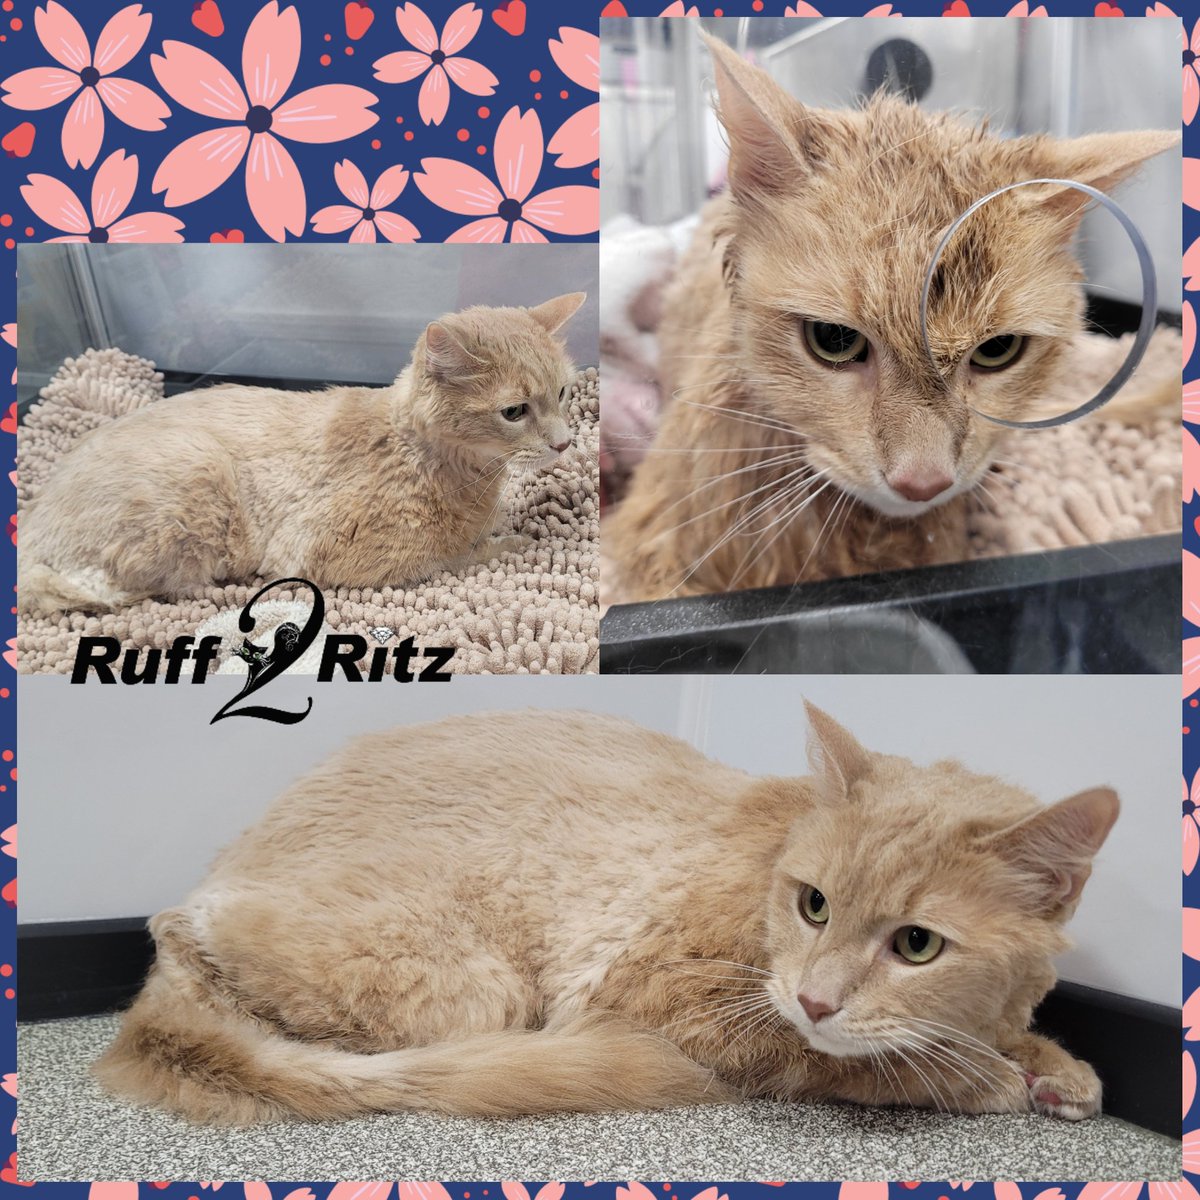 Teddy Bear trim on this ginger cutie pie.

#mobilecatgroomer
#ruff2ritzgrooming 
#catbath 
#catgrooming 
#catoftheday 
#crazycatlady 
#catlovers 
#catlife 
#catloversclub 
#meow 
#catsofworld 
#cutecats 
#ilovecats 
#catlover 
#kitty